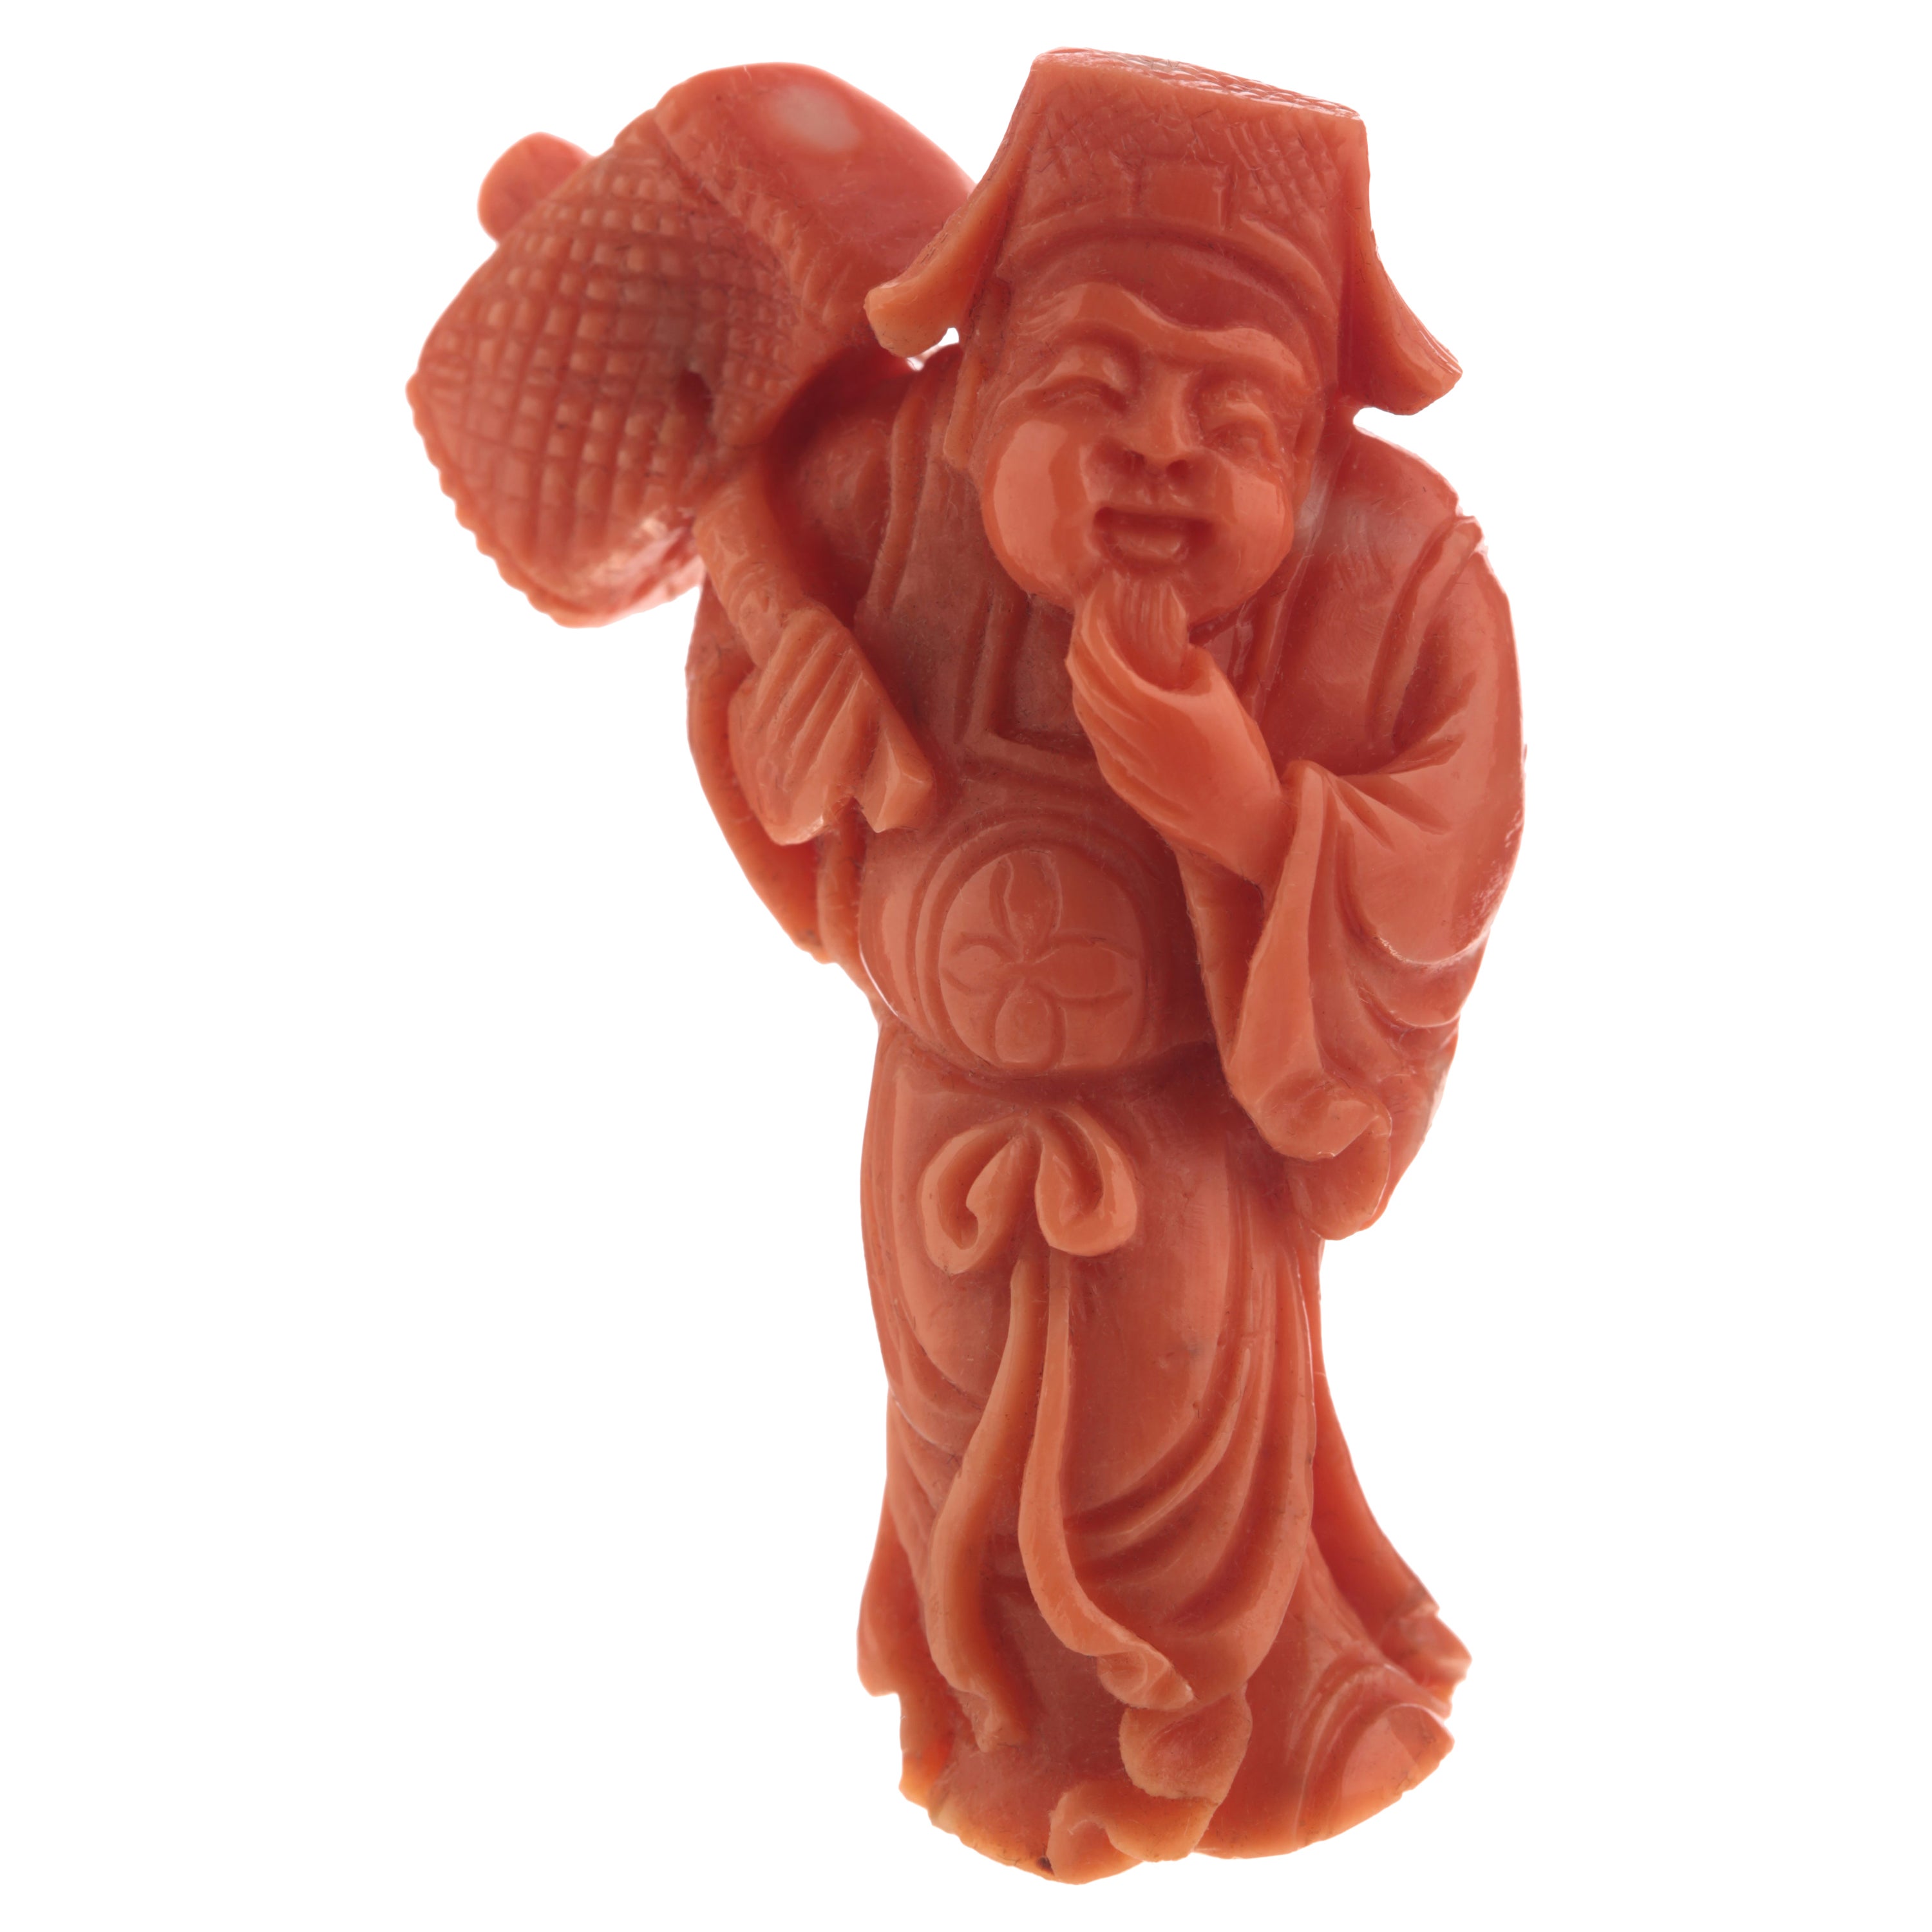 Wise Man Buddhist Carved Asian Decorative Art Statue Sculpture Natural Red Coral For Sale